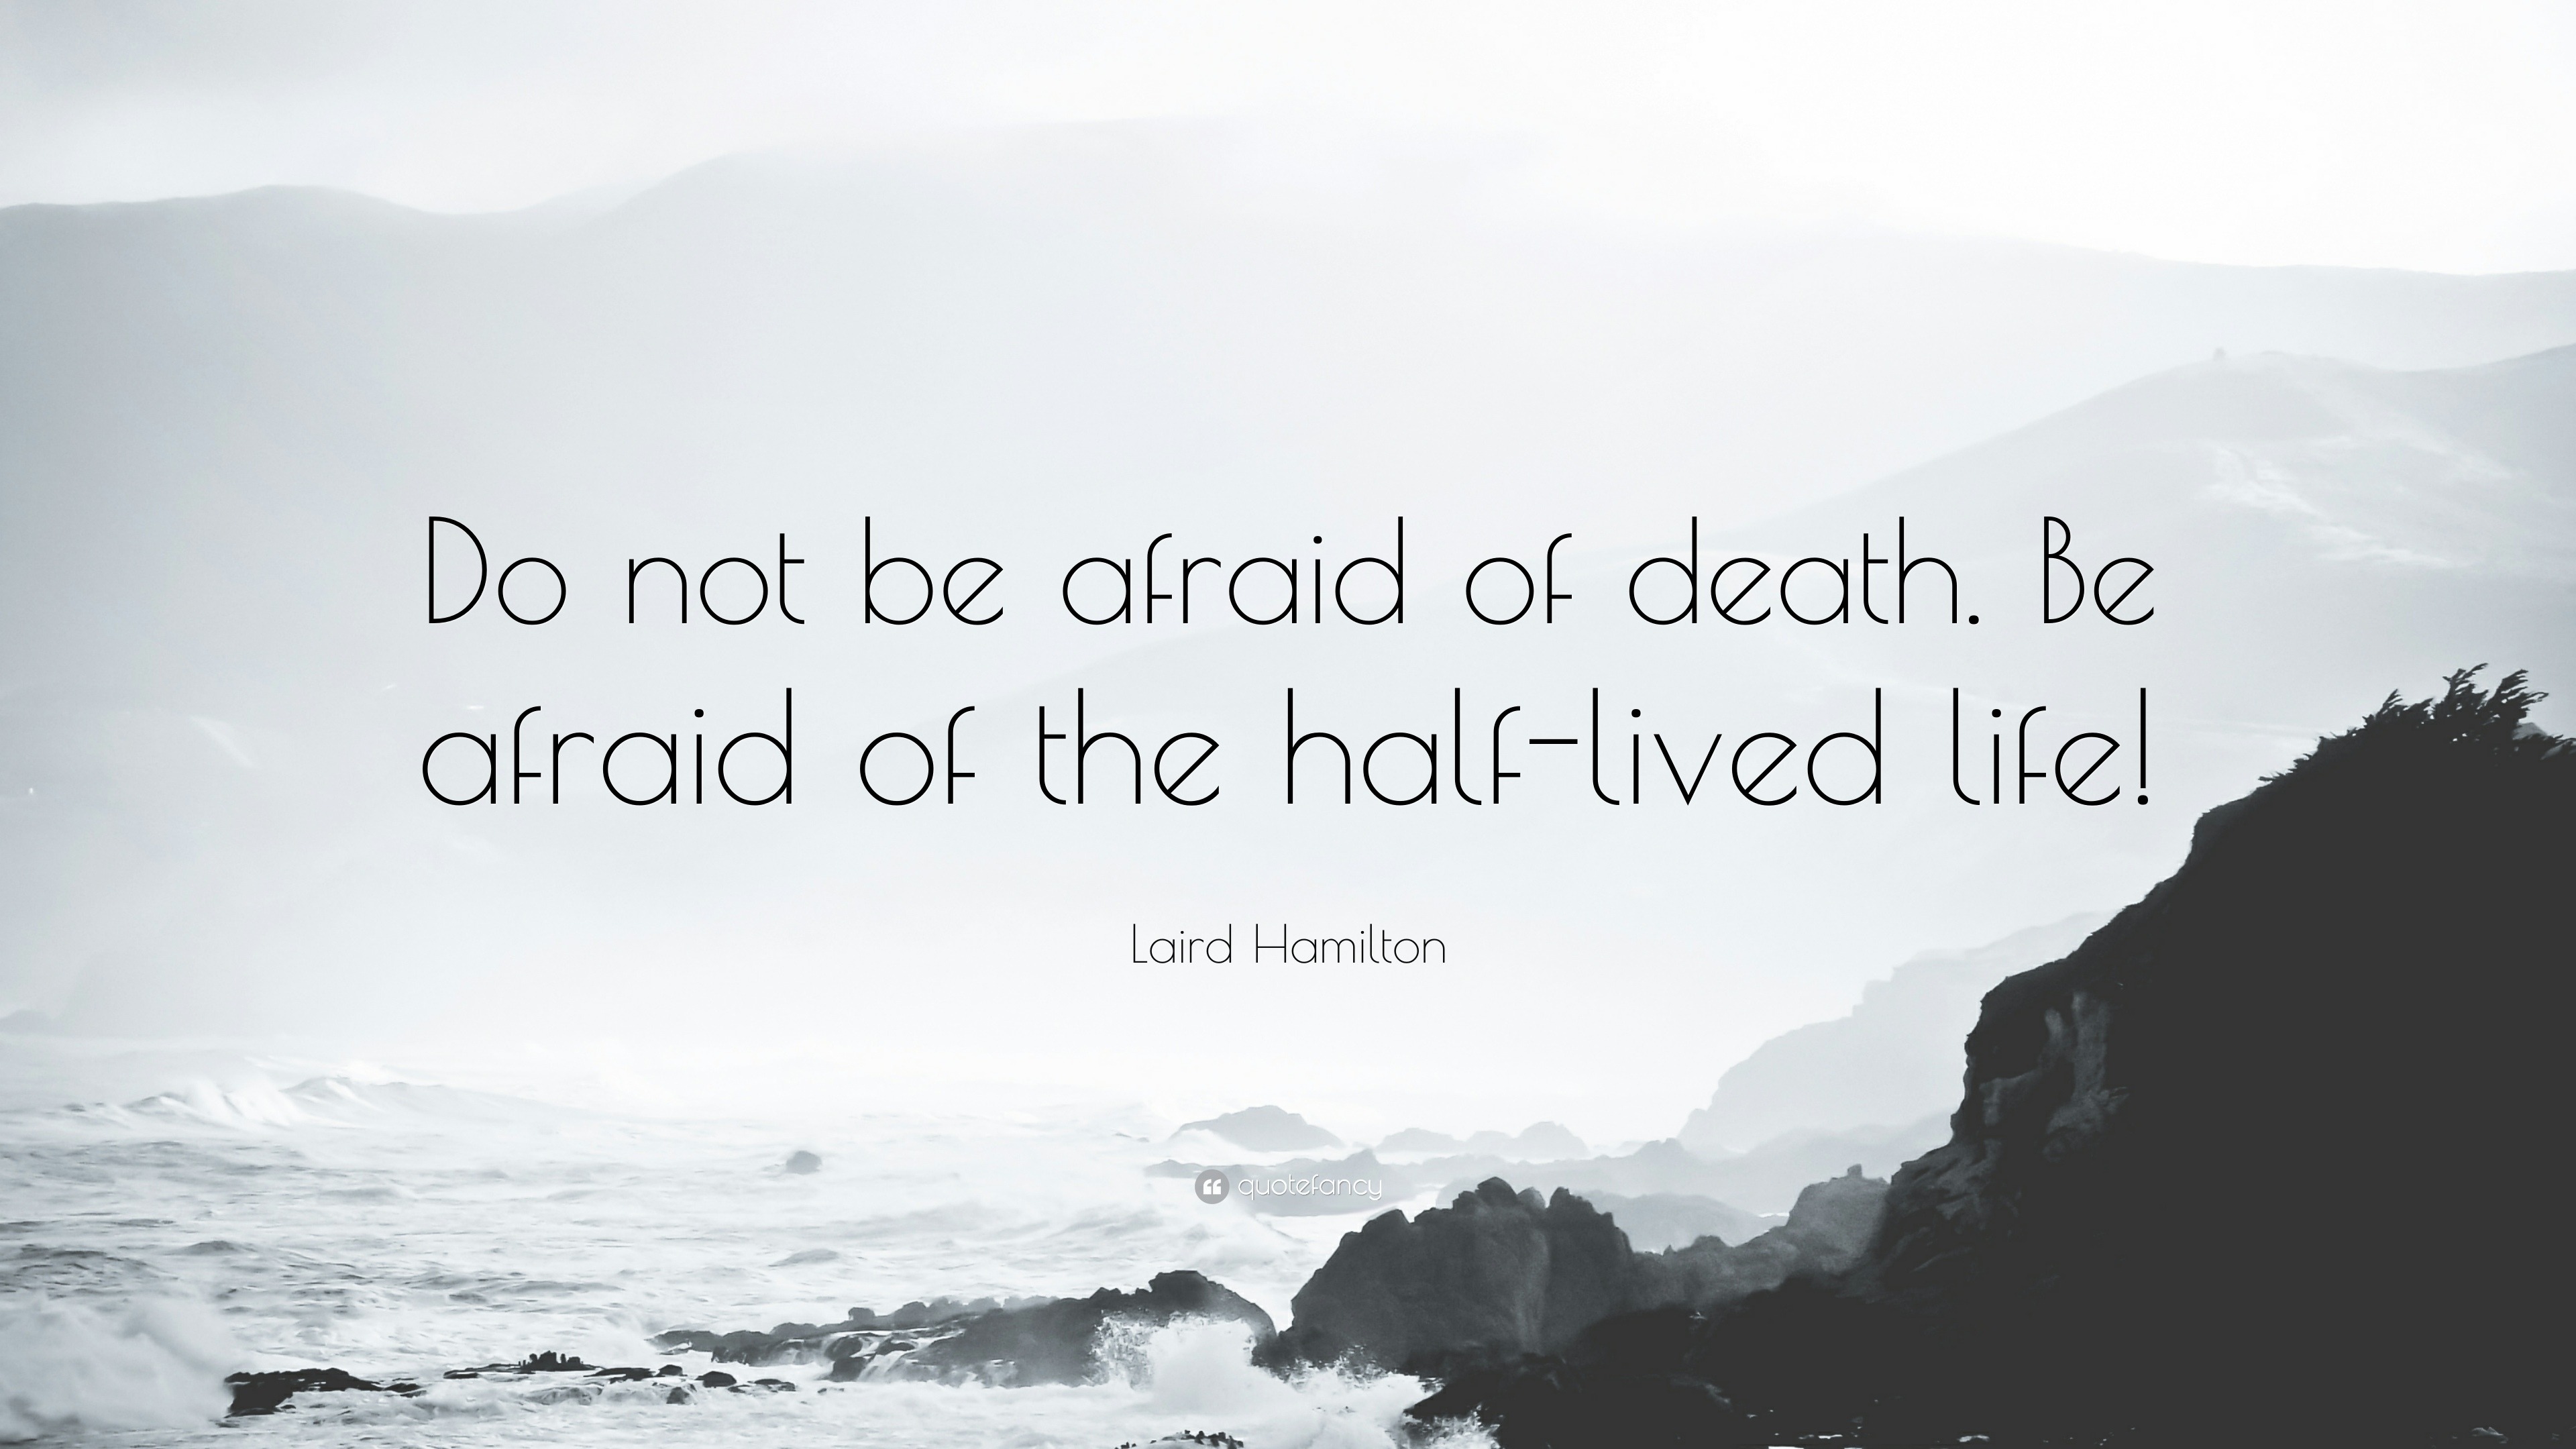 Laird Hamilton Quote “Do not be afraid of Be afraid of the